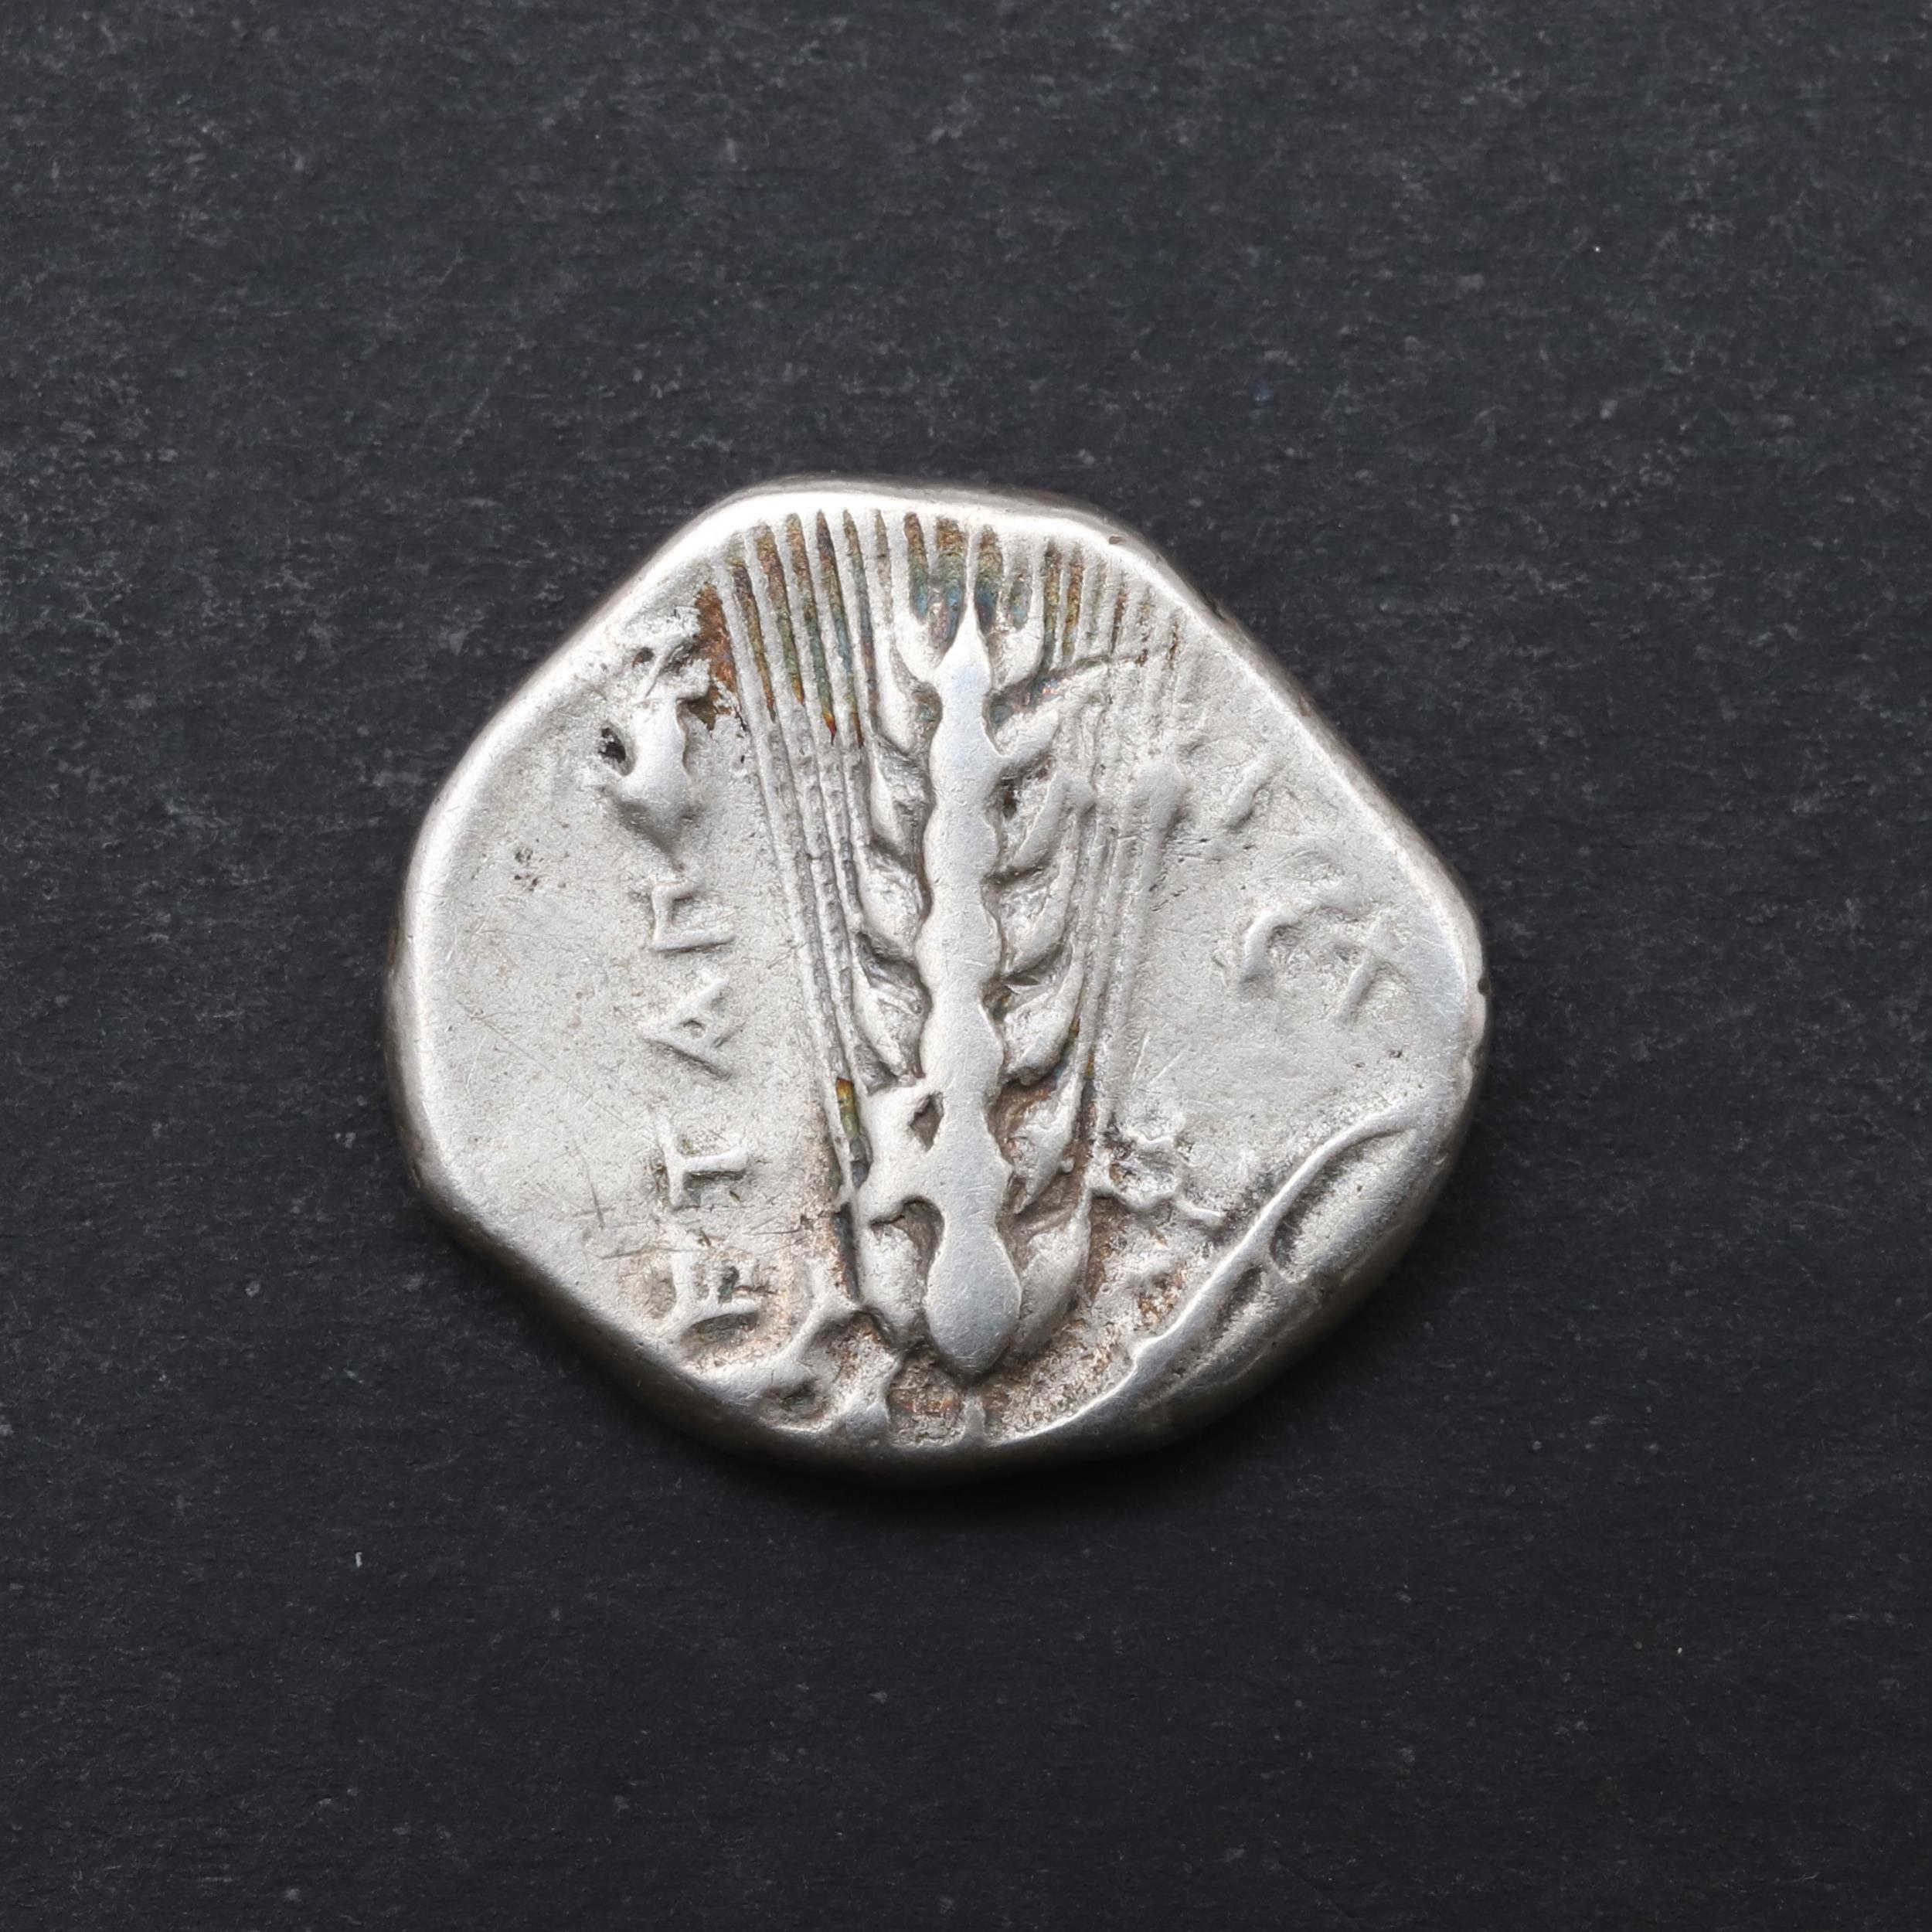 GREEK COINS: METAPONTION, SILVER STATER, 330 - 300 BC. - Image 2 of 4